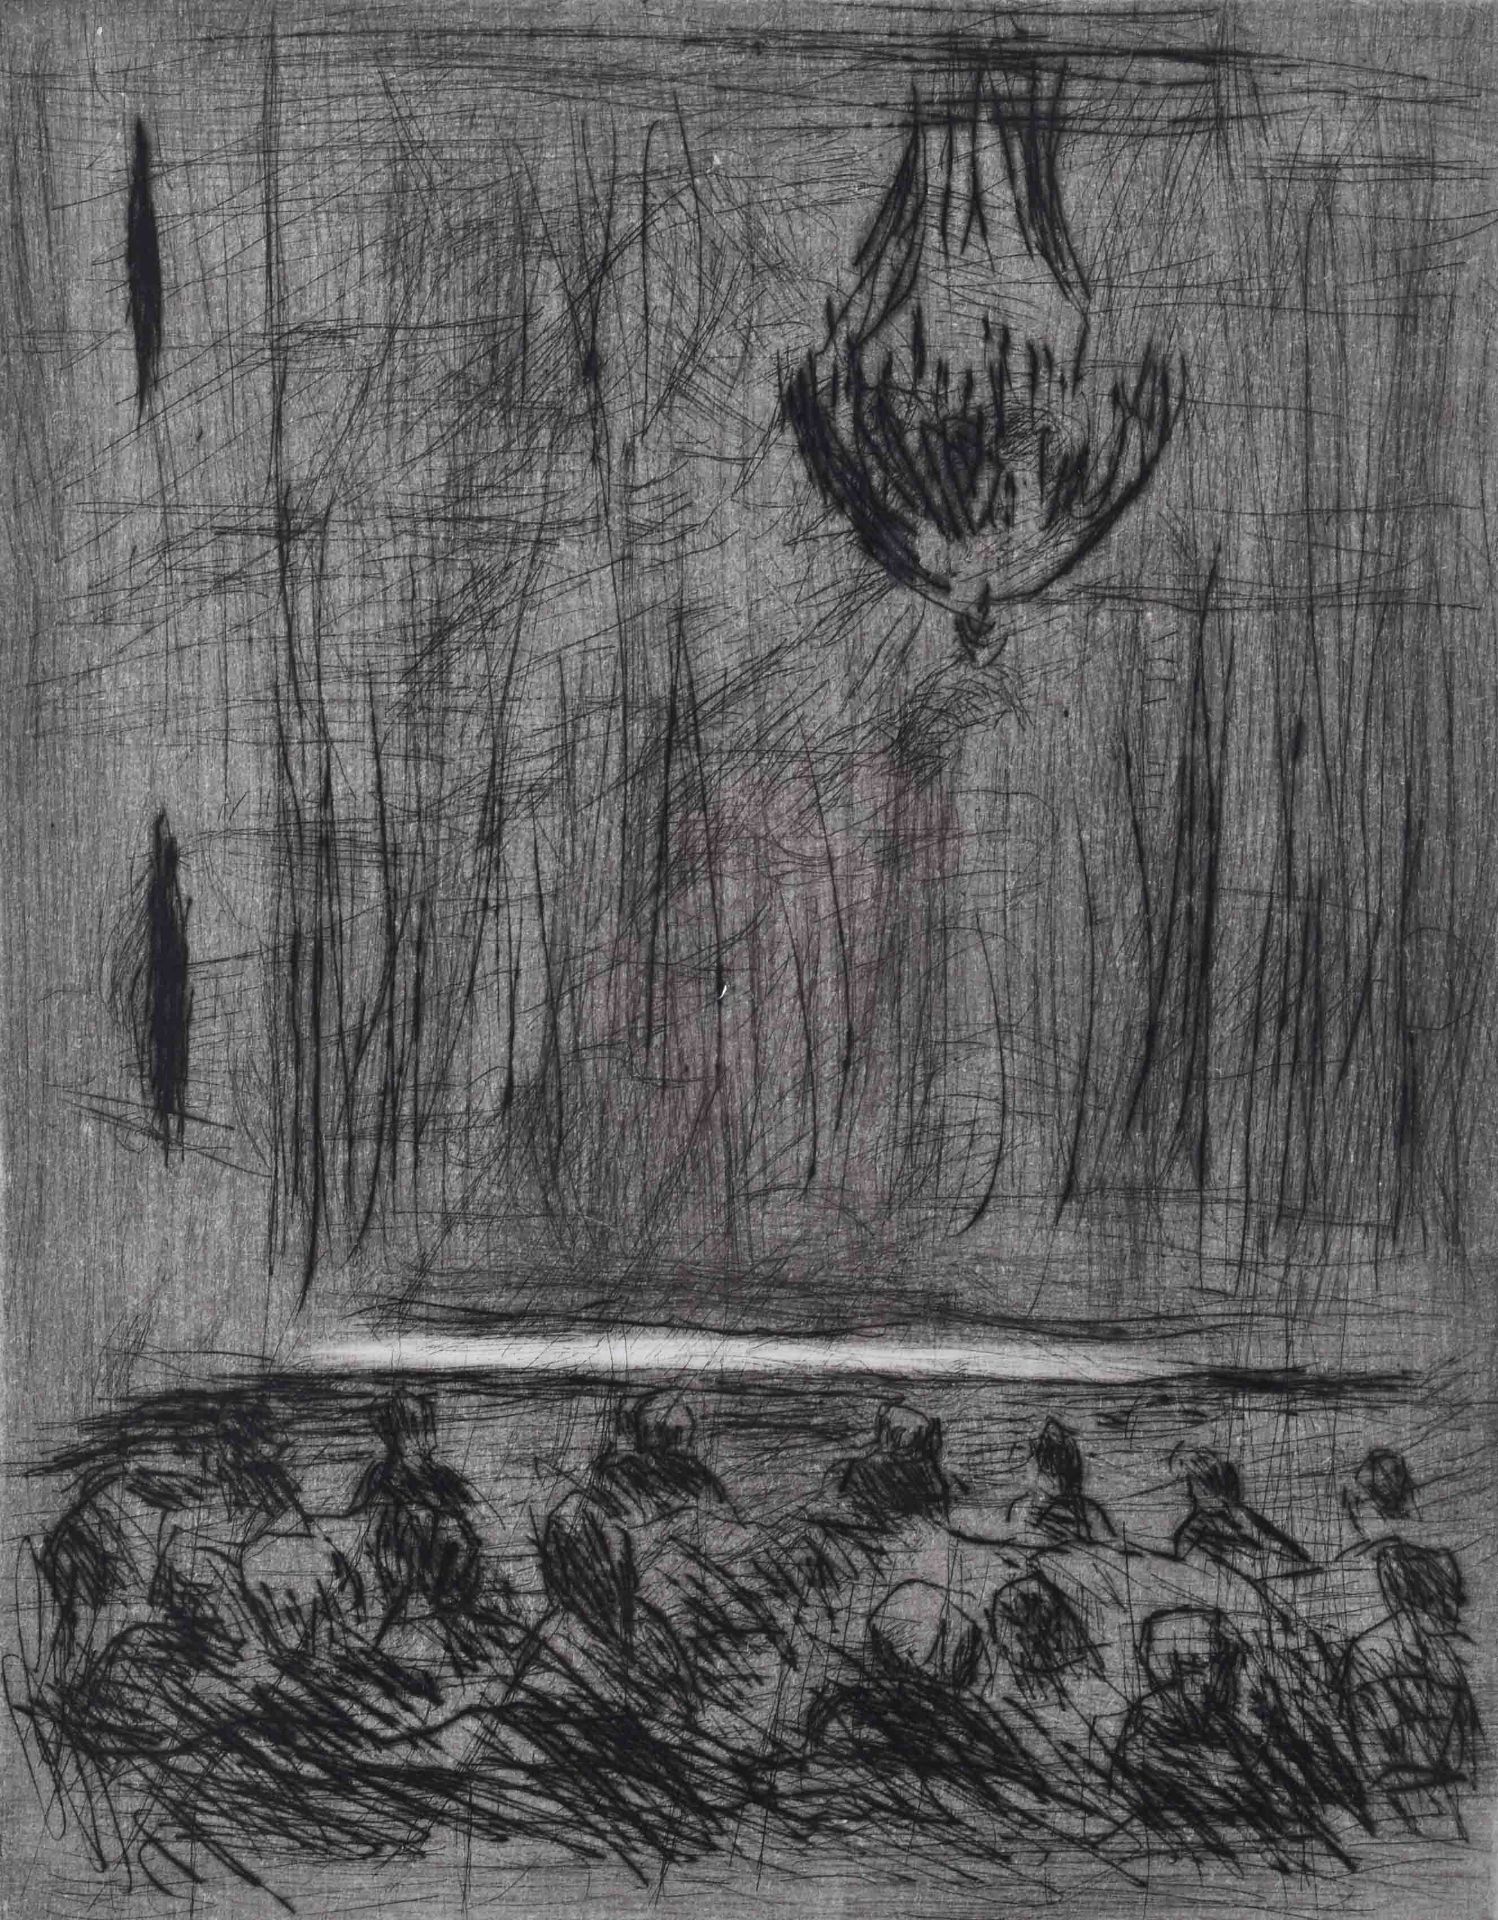 Arno MOHR (1910-2001)"In the opera" (about 1983)cold-drawing on handmade paper, sheet size 39 cm x - Bild 2 aus 4